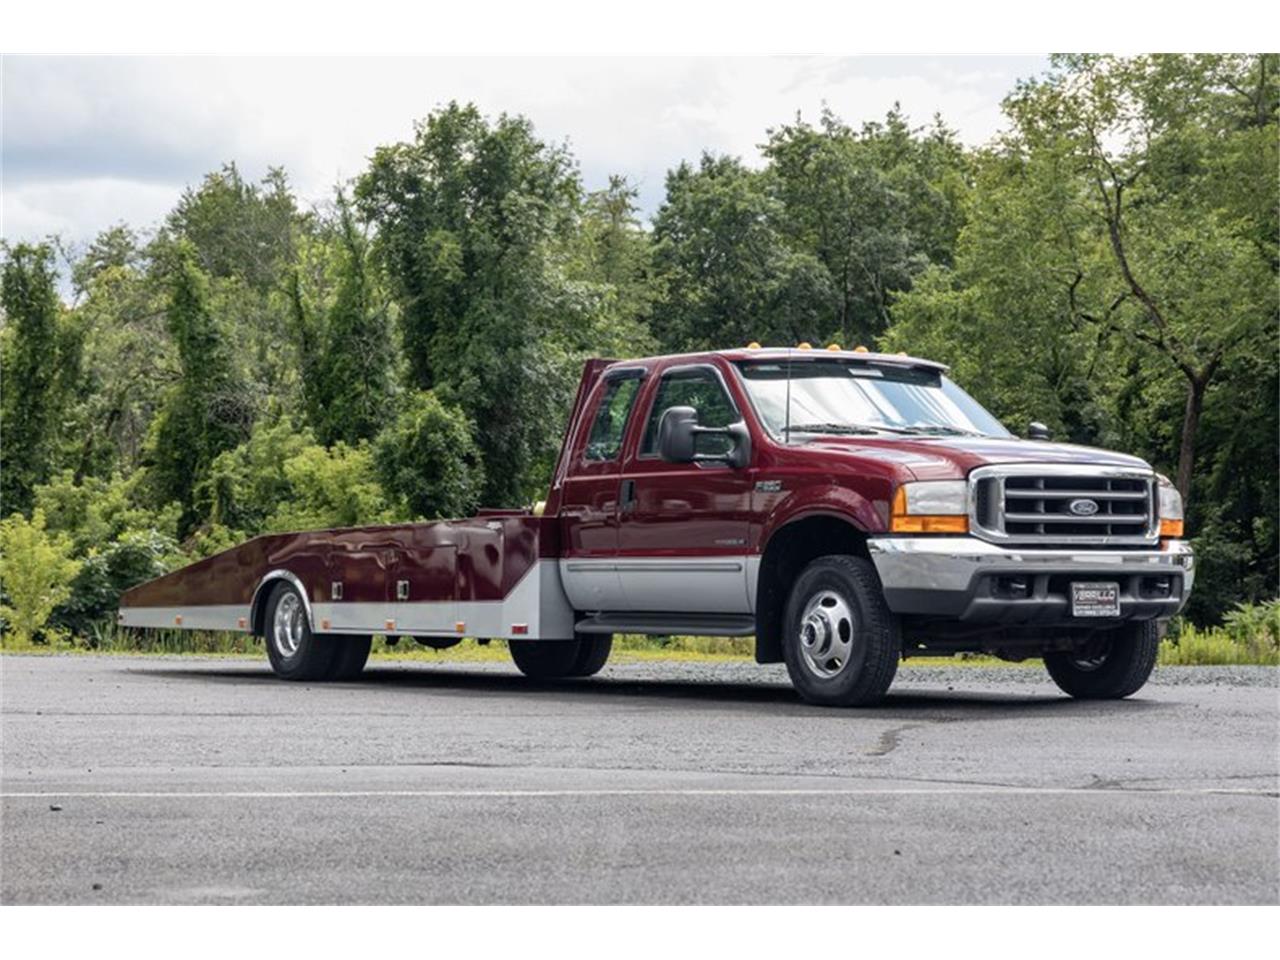 For Sale: 1999 Ford Super Duty in Clifton Park, New York for sale in Clifton Park, NY